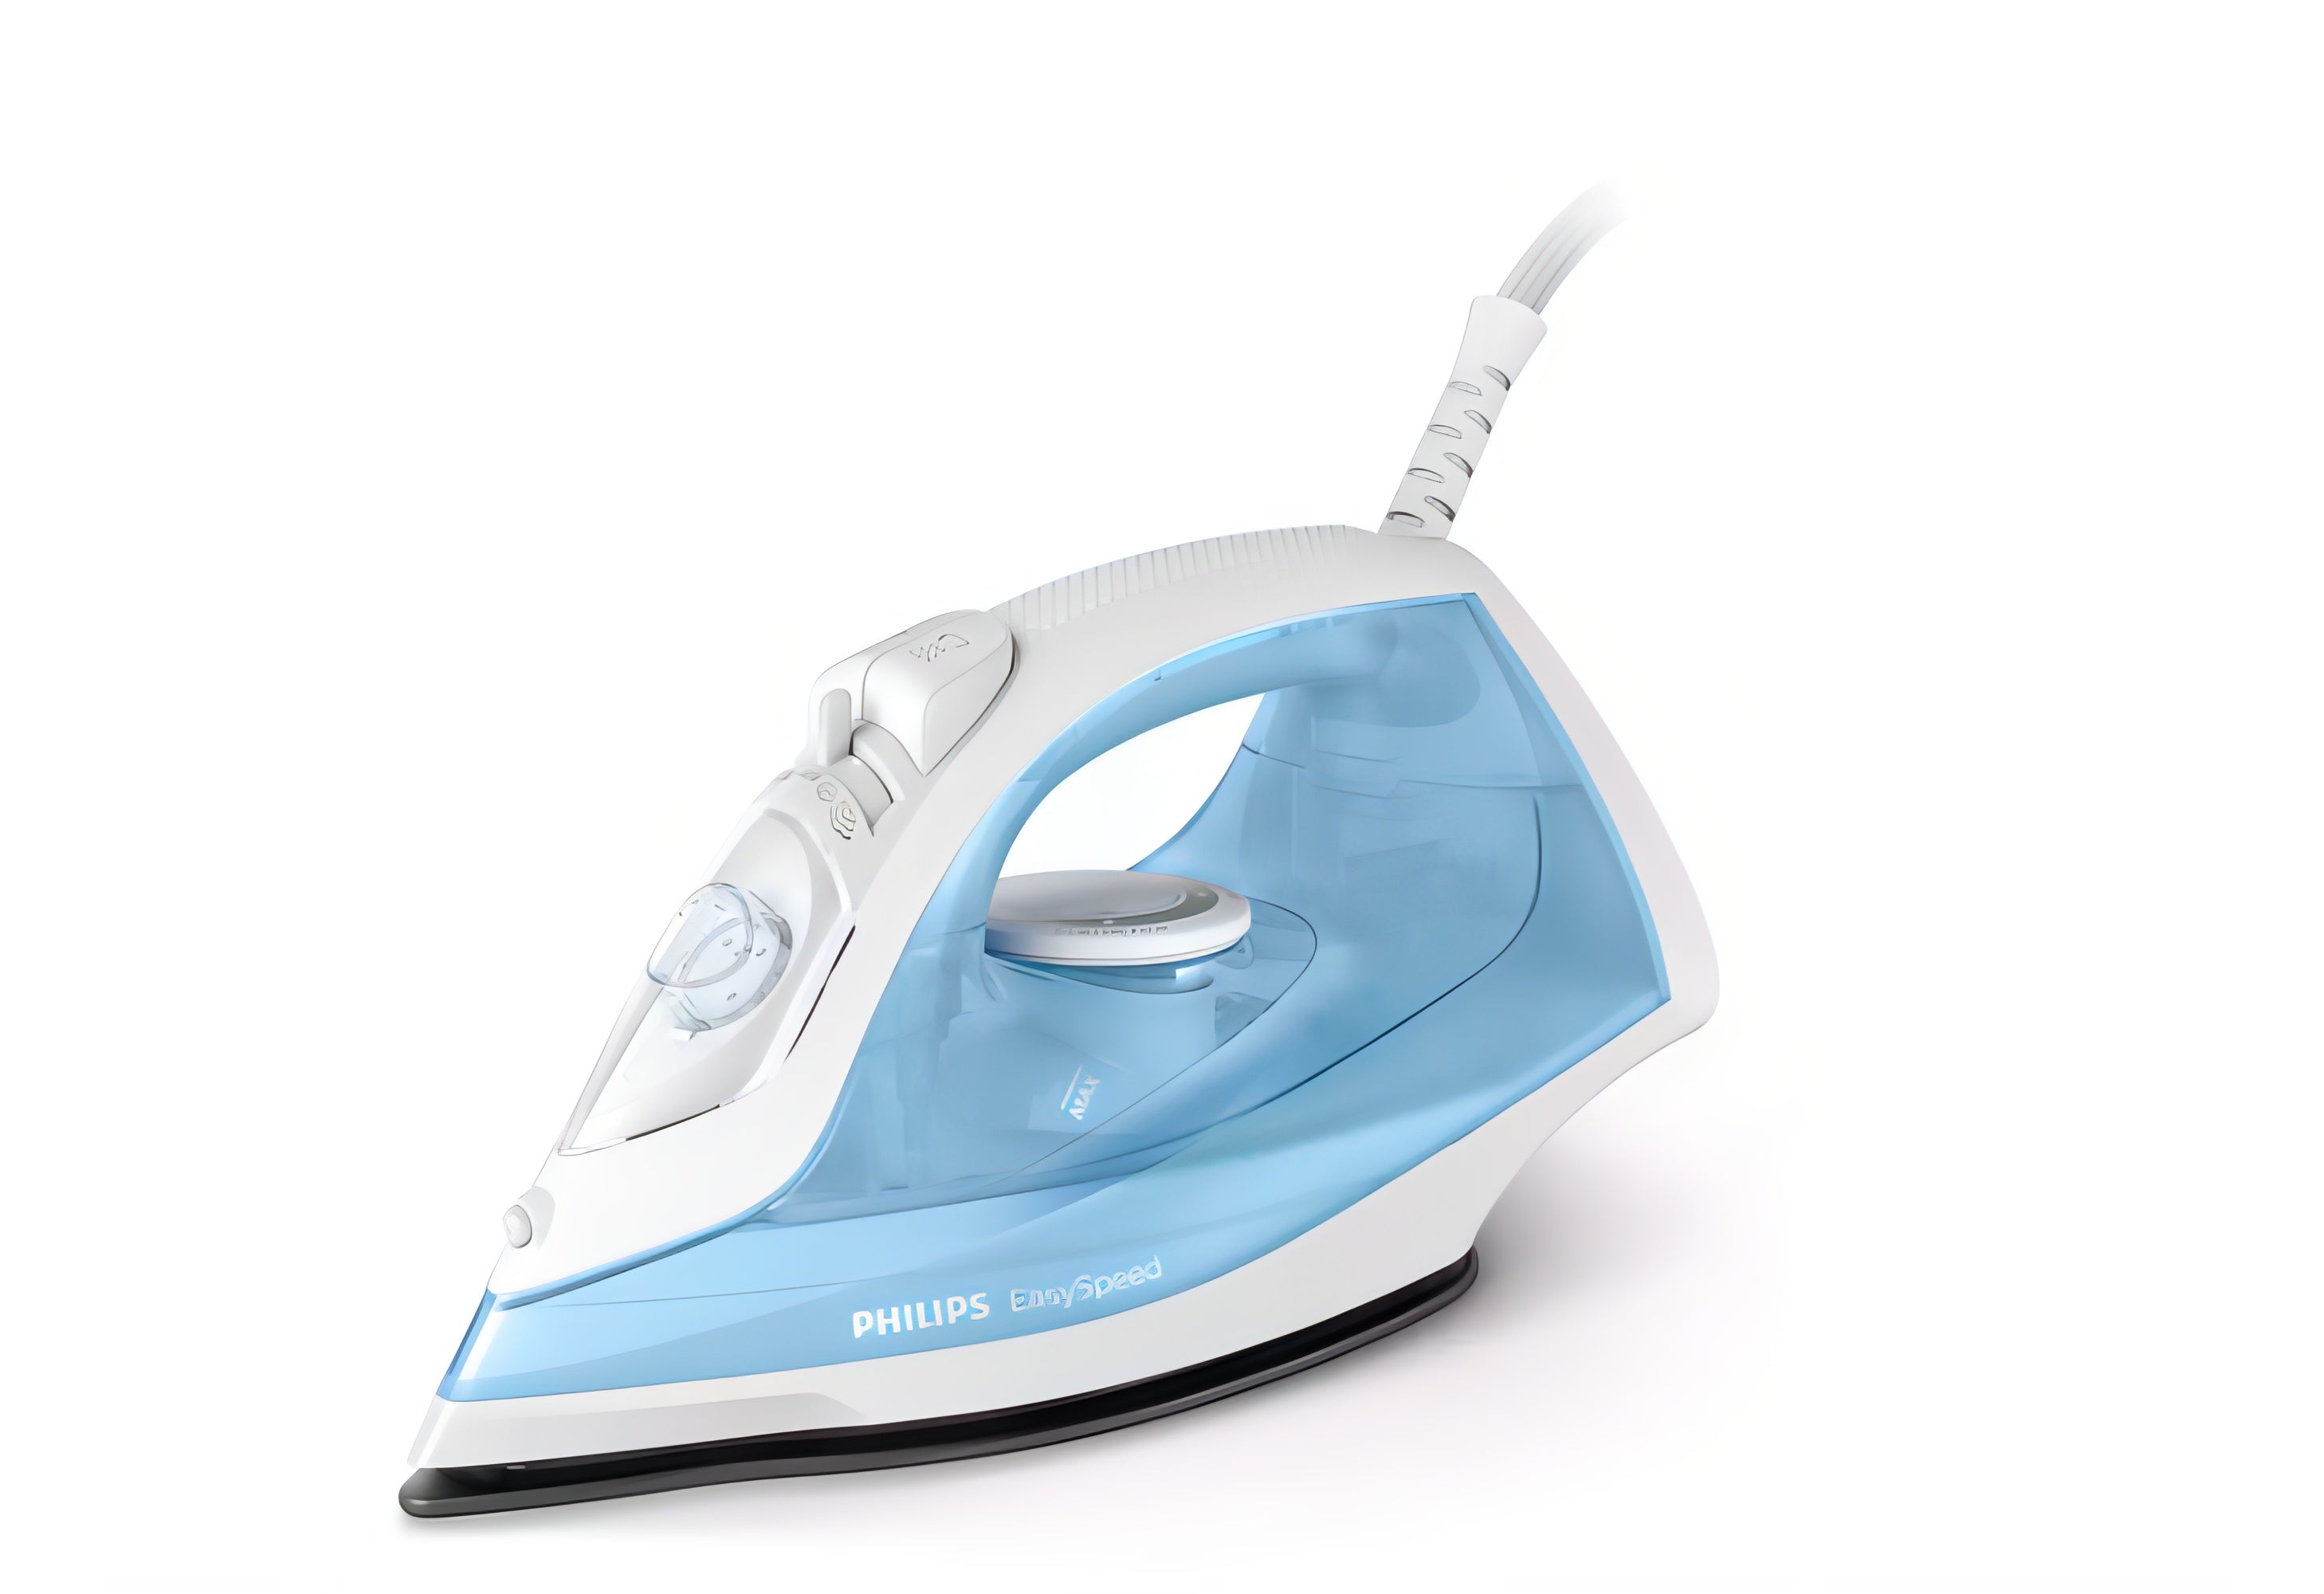 Philips Steam Iron - GC1740/26 | reliable performance | lightweight | variable steam settings | safety features | stylish | even heat distribution | Halabh.com